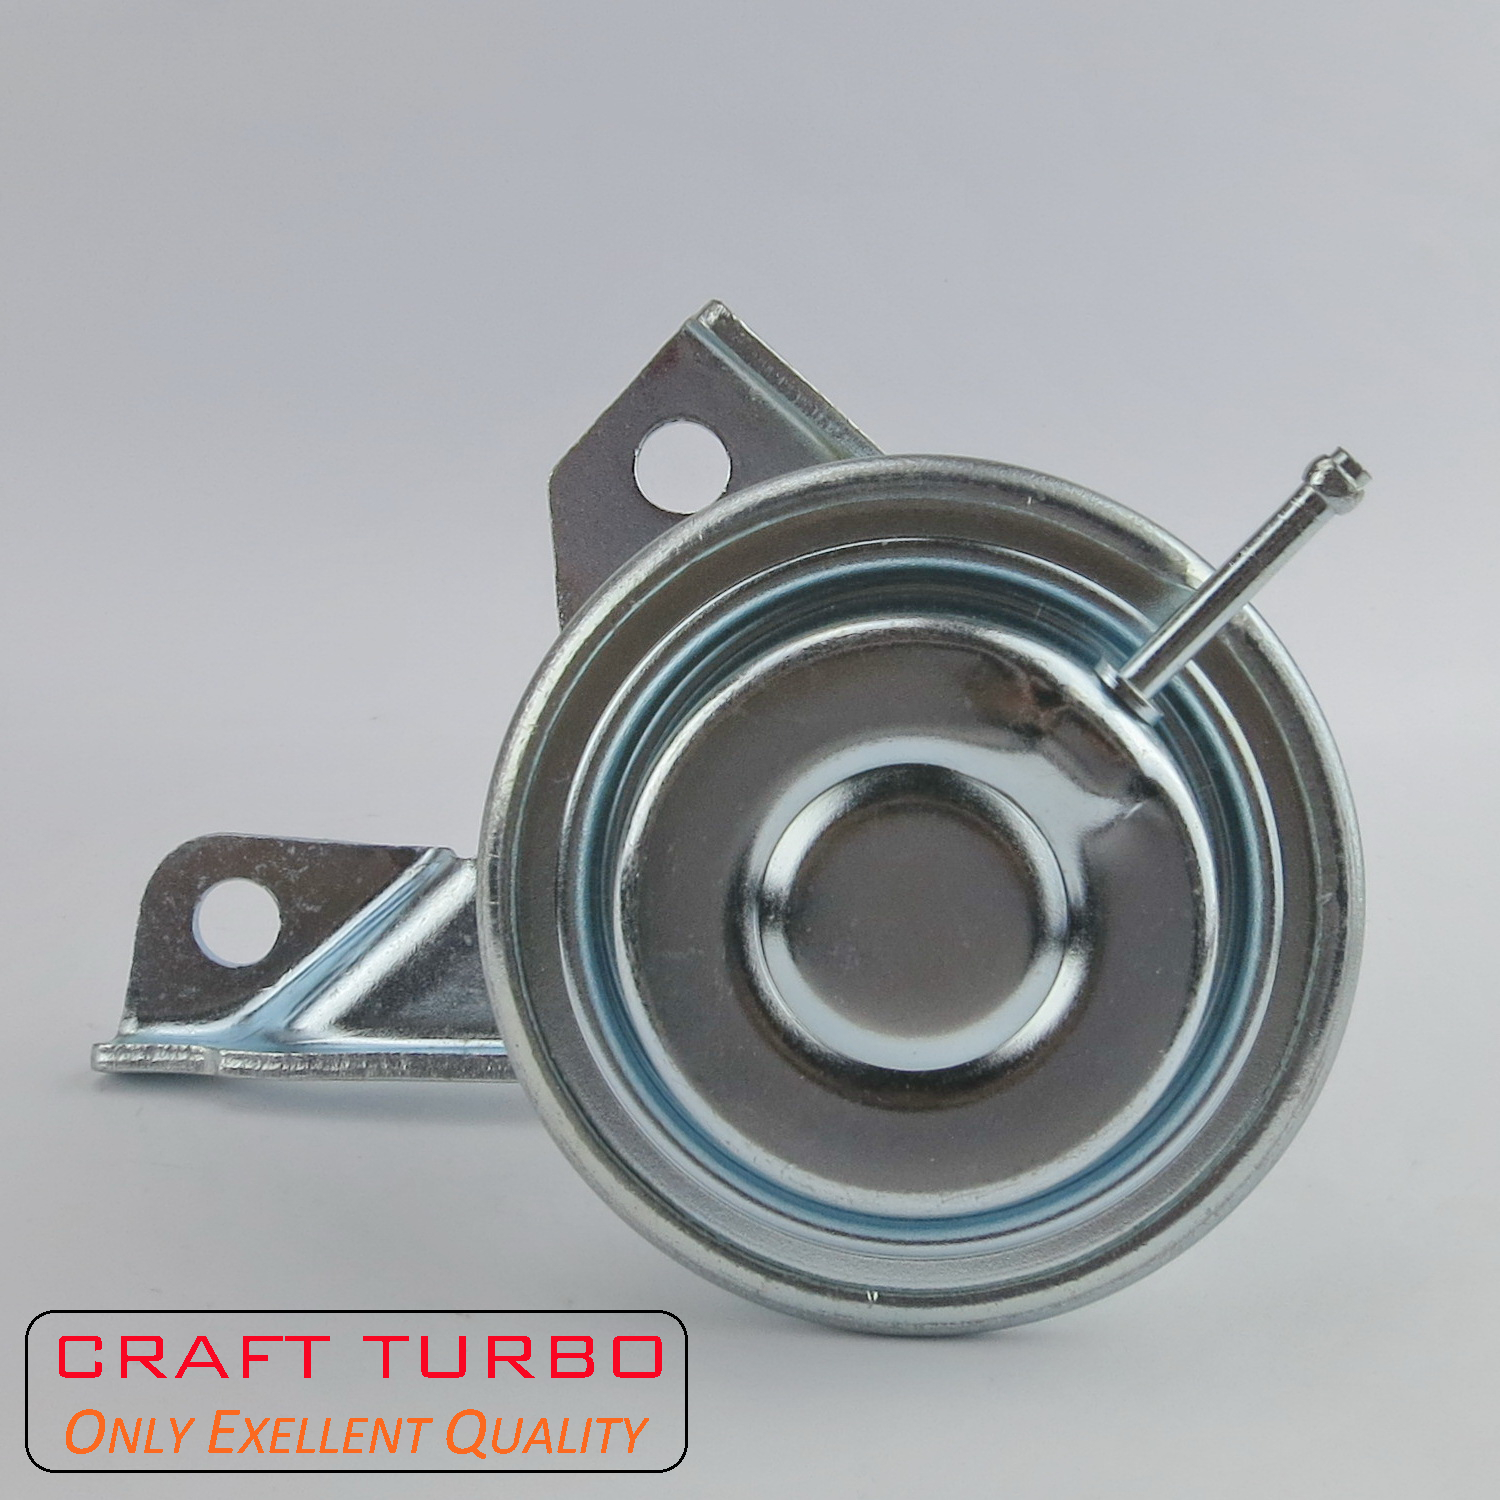 TD04 Actuator for Turbochargers 